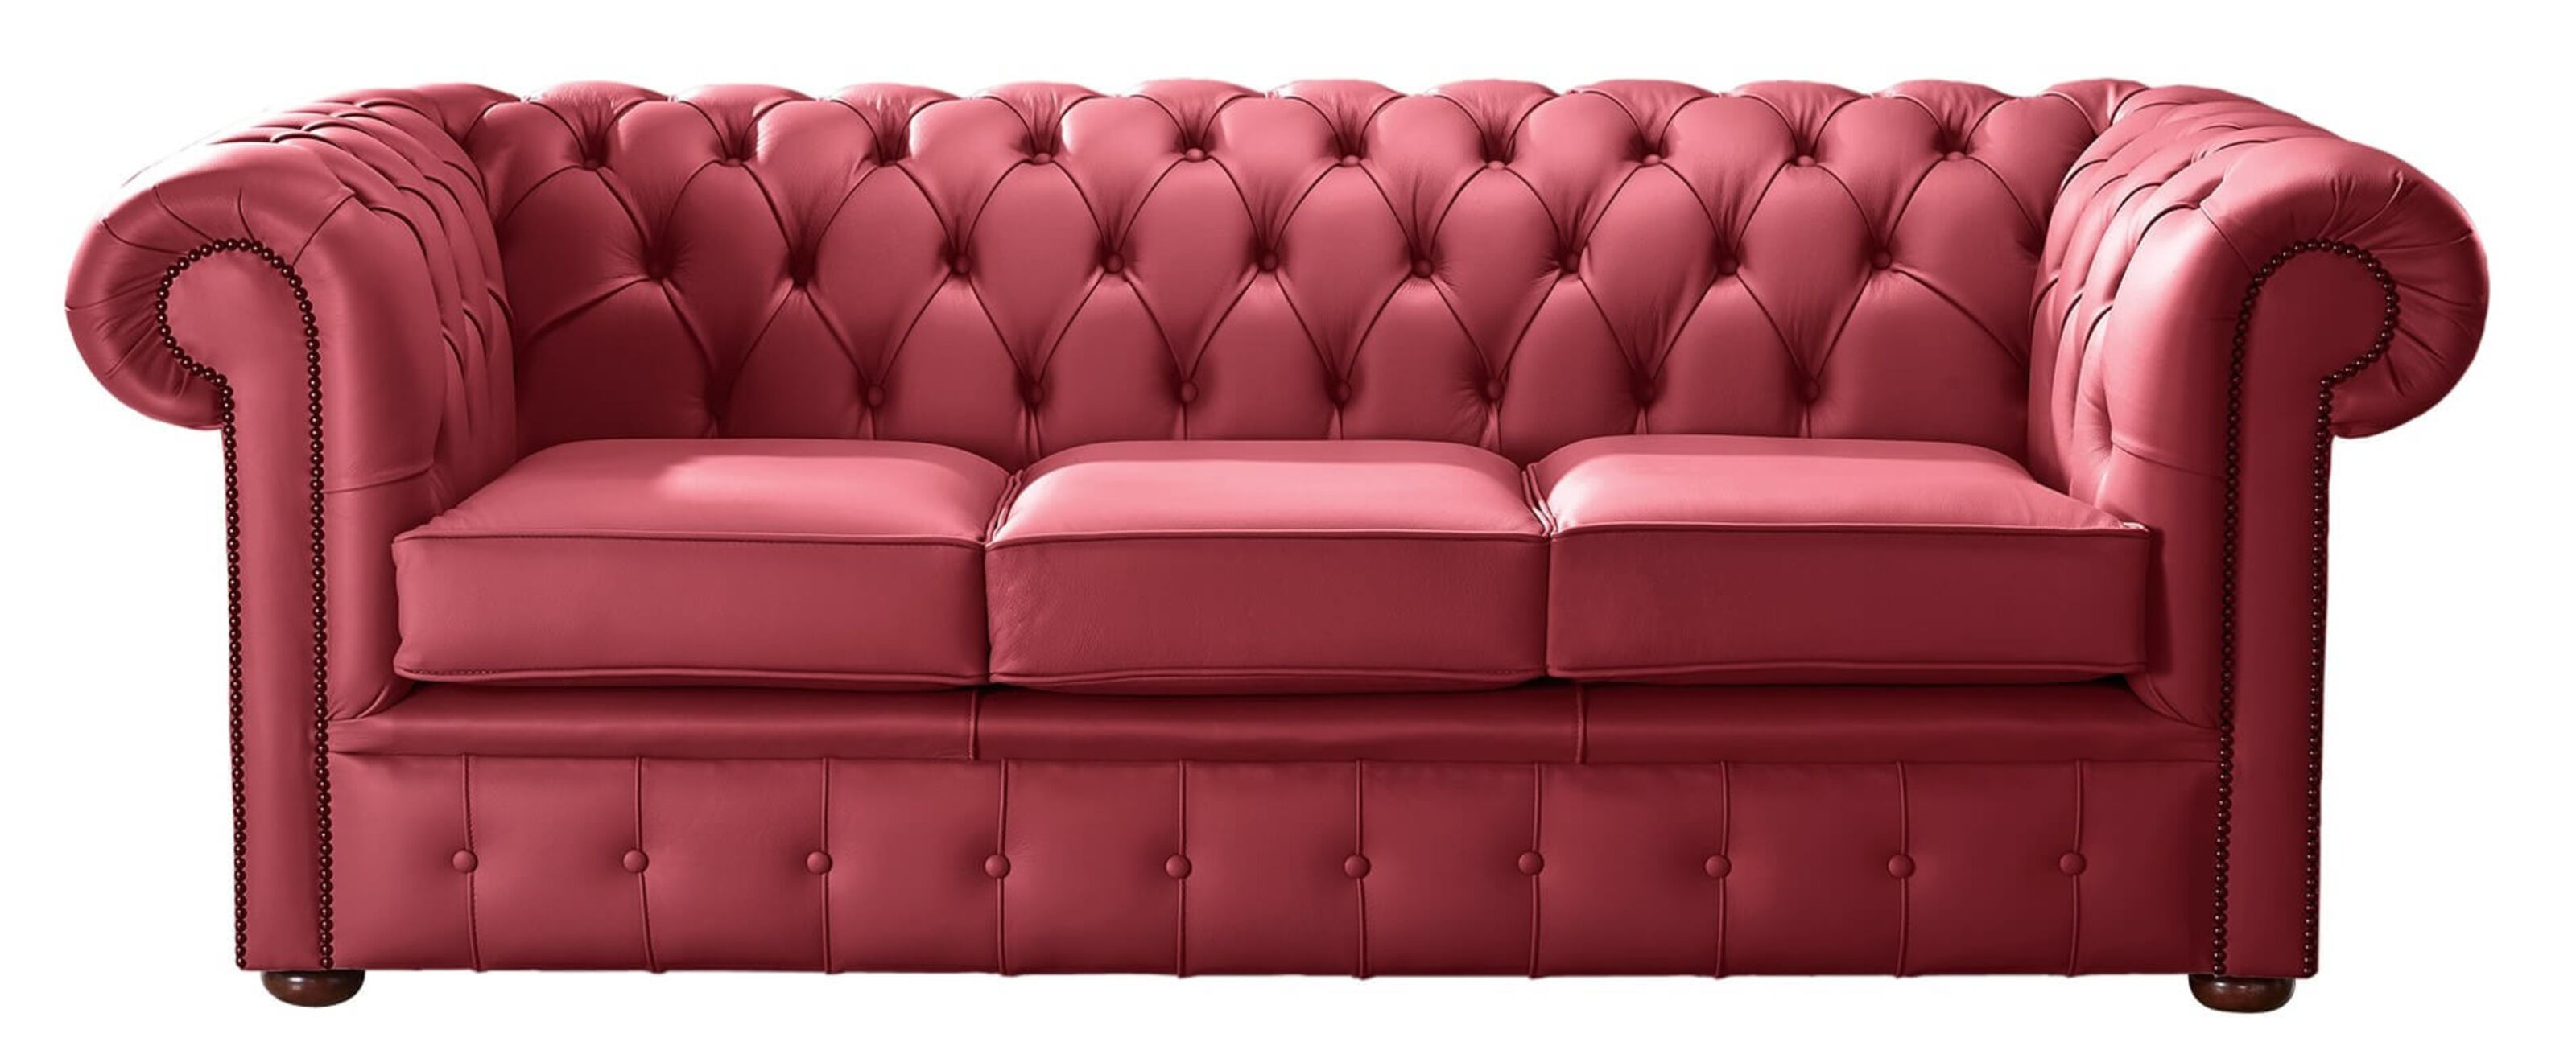 Ultimate Guide to Finding the Perfect Chesterfield Sofabed  %Post Title